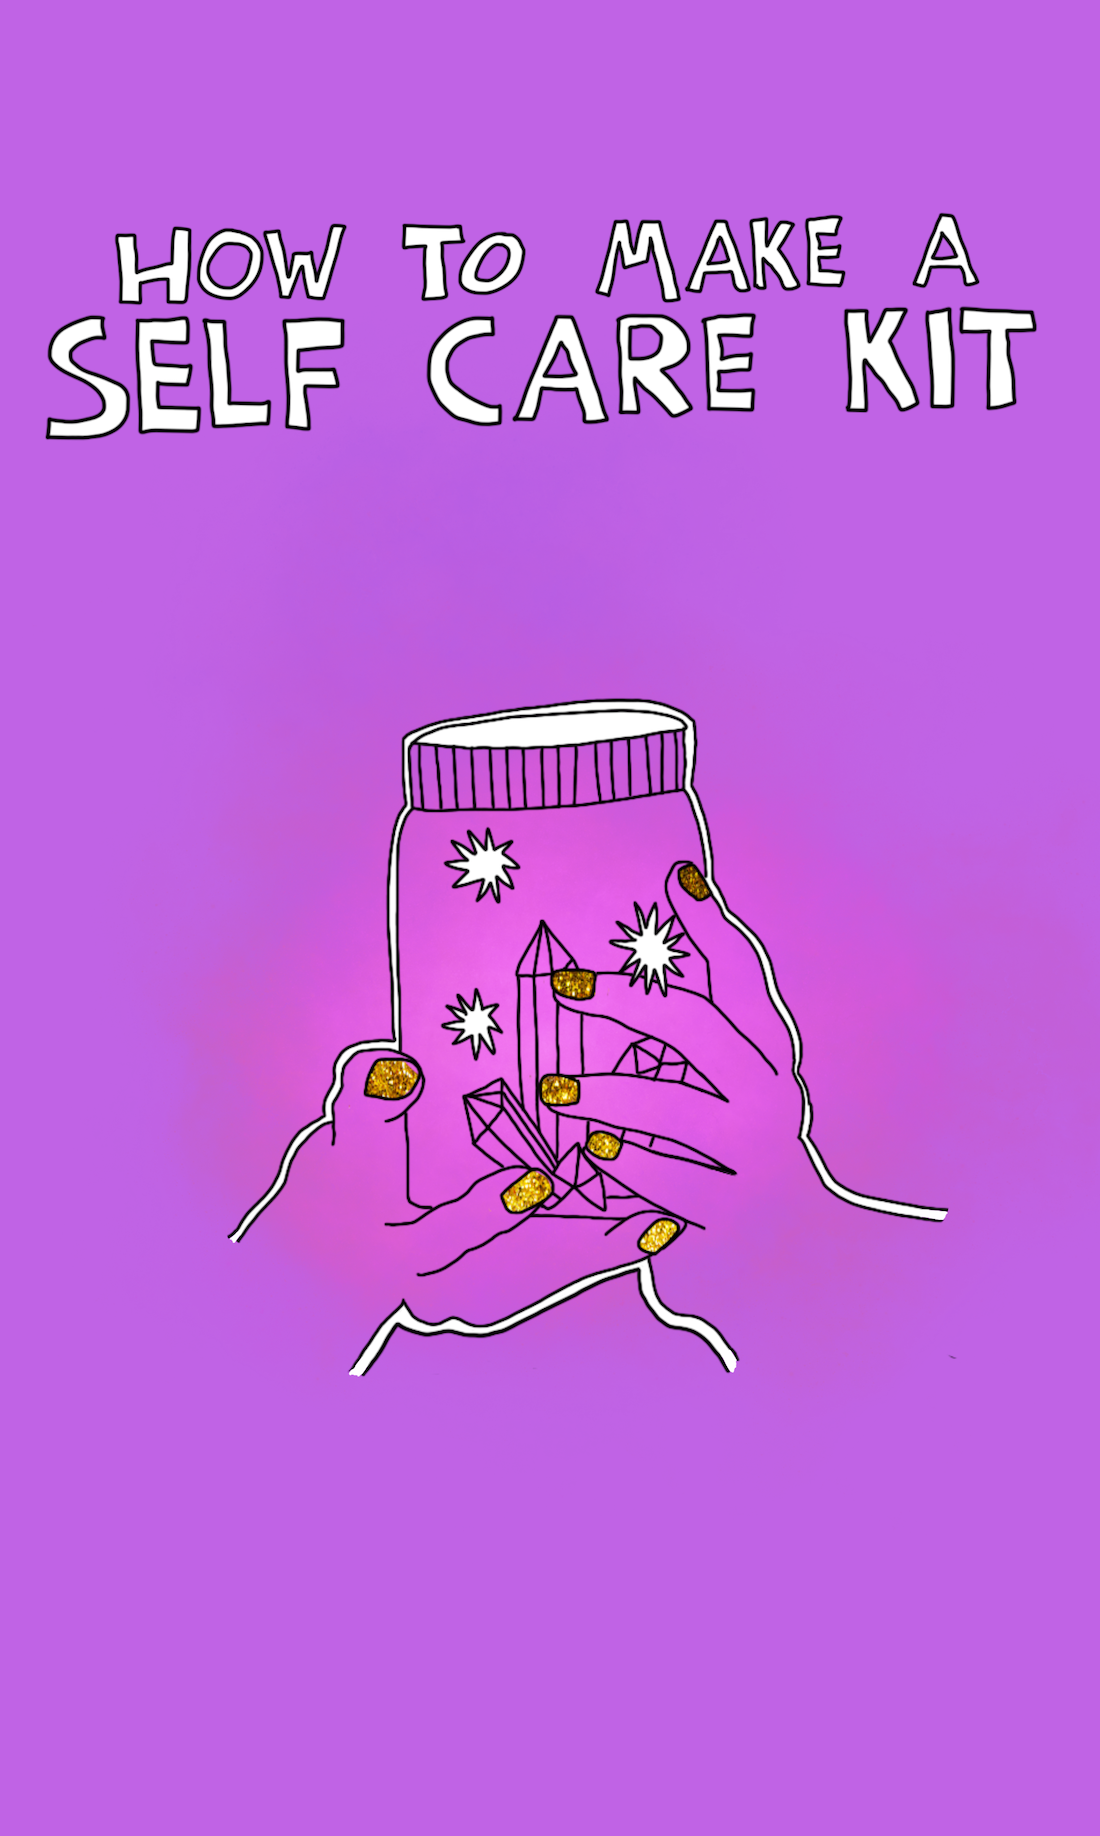 How to make a self care kit